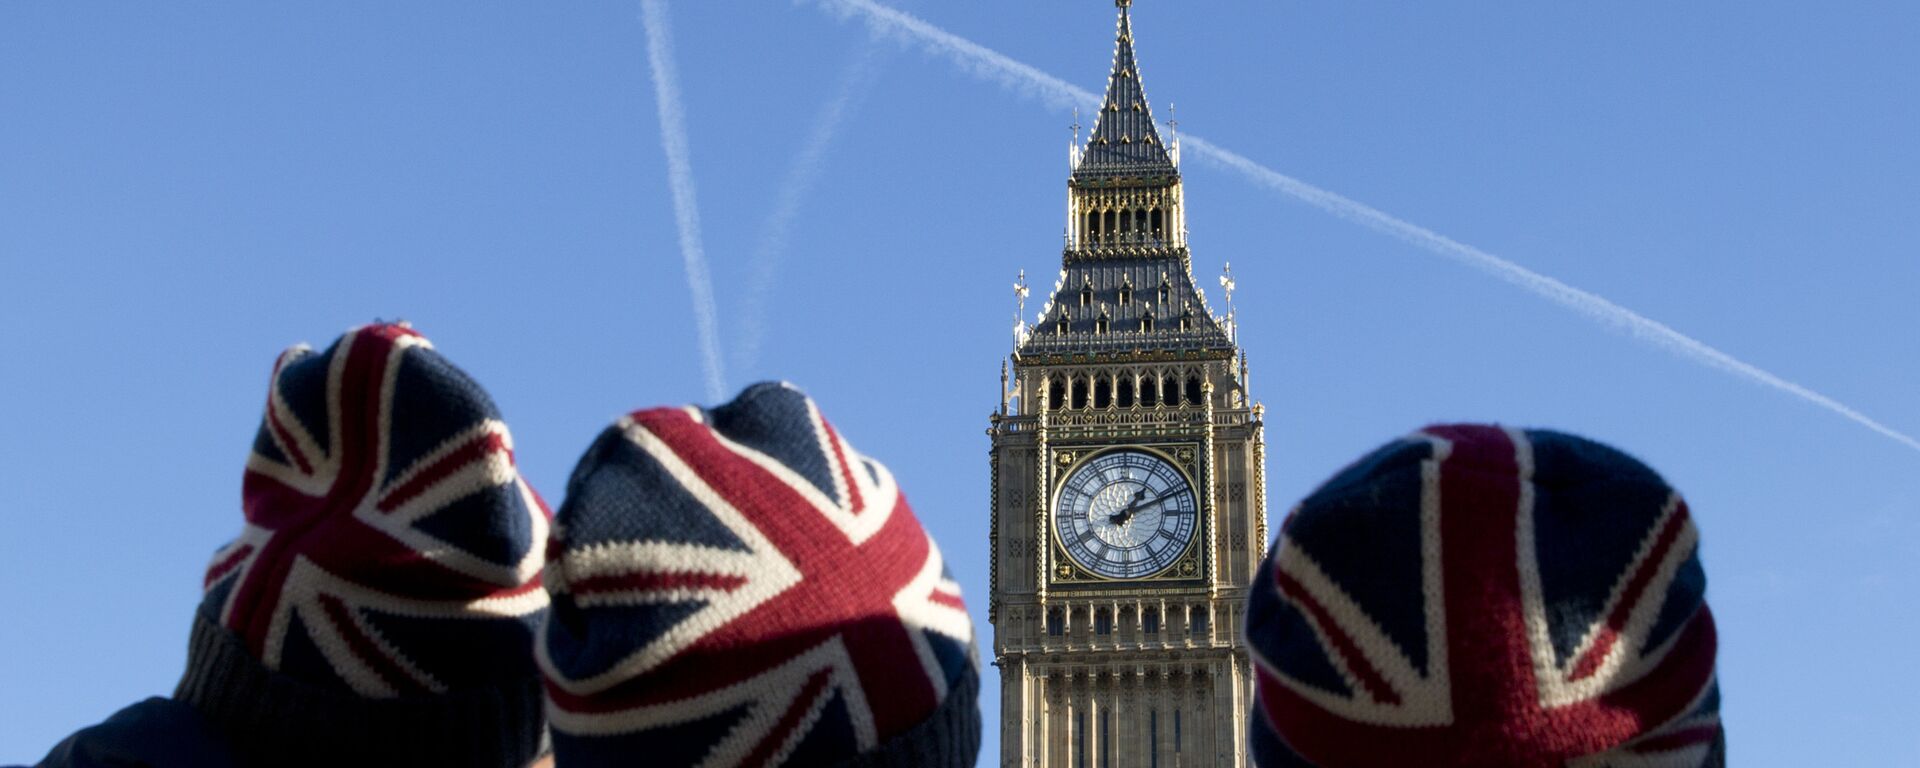 People wear Union flag-themed hats as they look at the Elizabeth Tower, better known as Big Ben, near the Houses of Parliament in London on January 17, 2017.  - Sputnik International, 1920, 19.06.2023